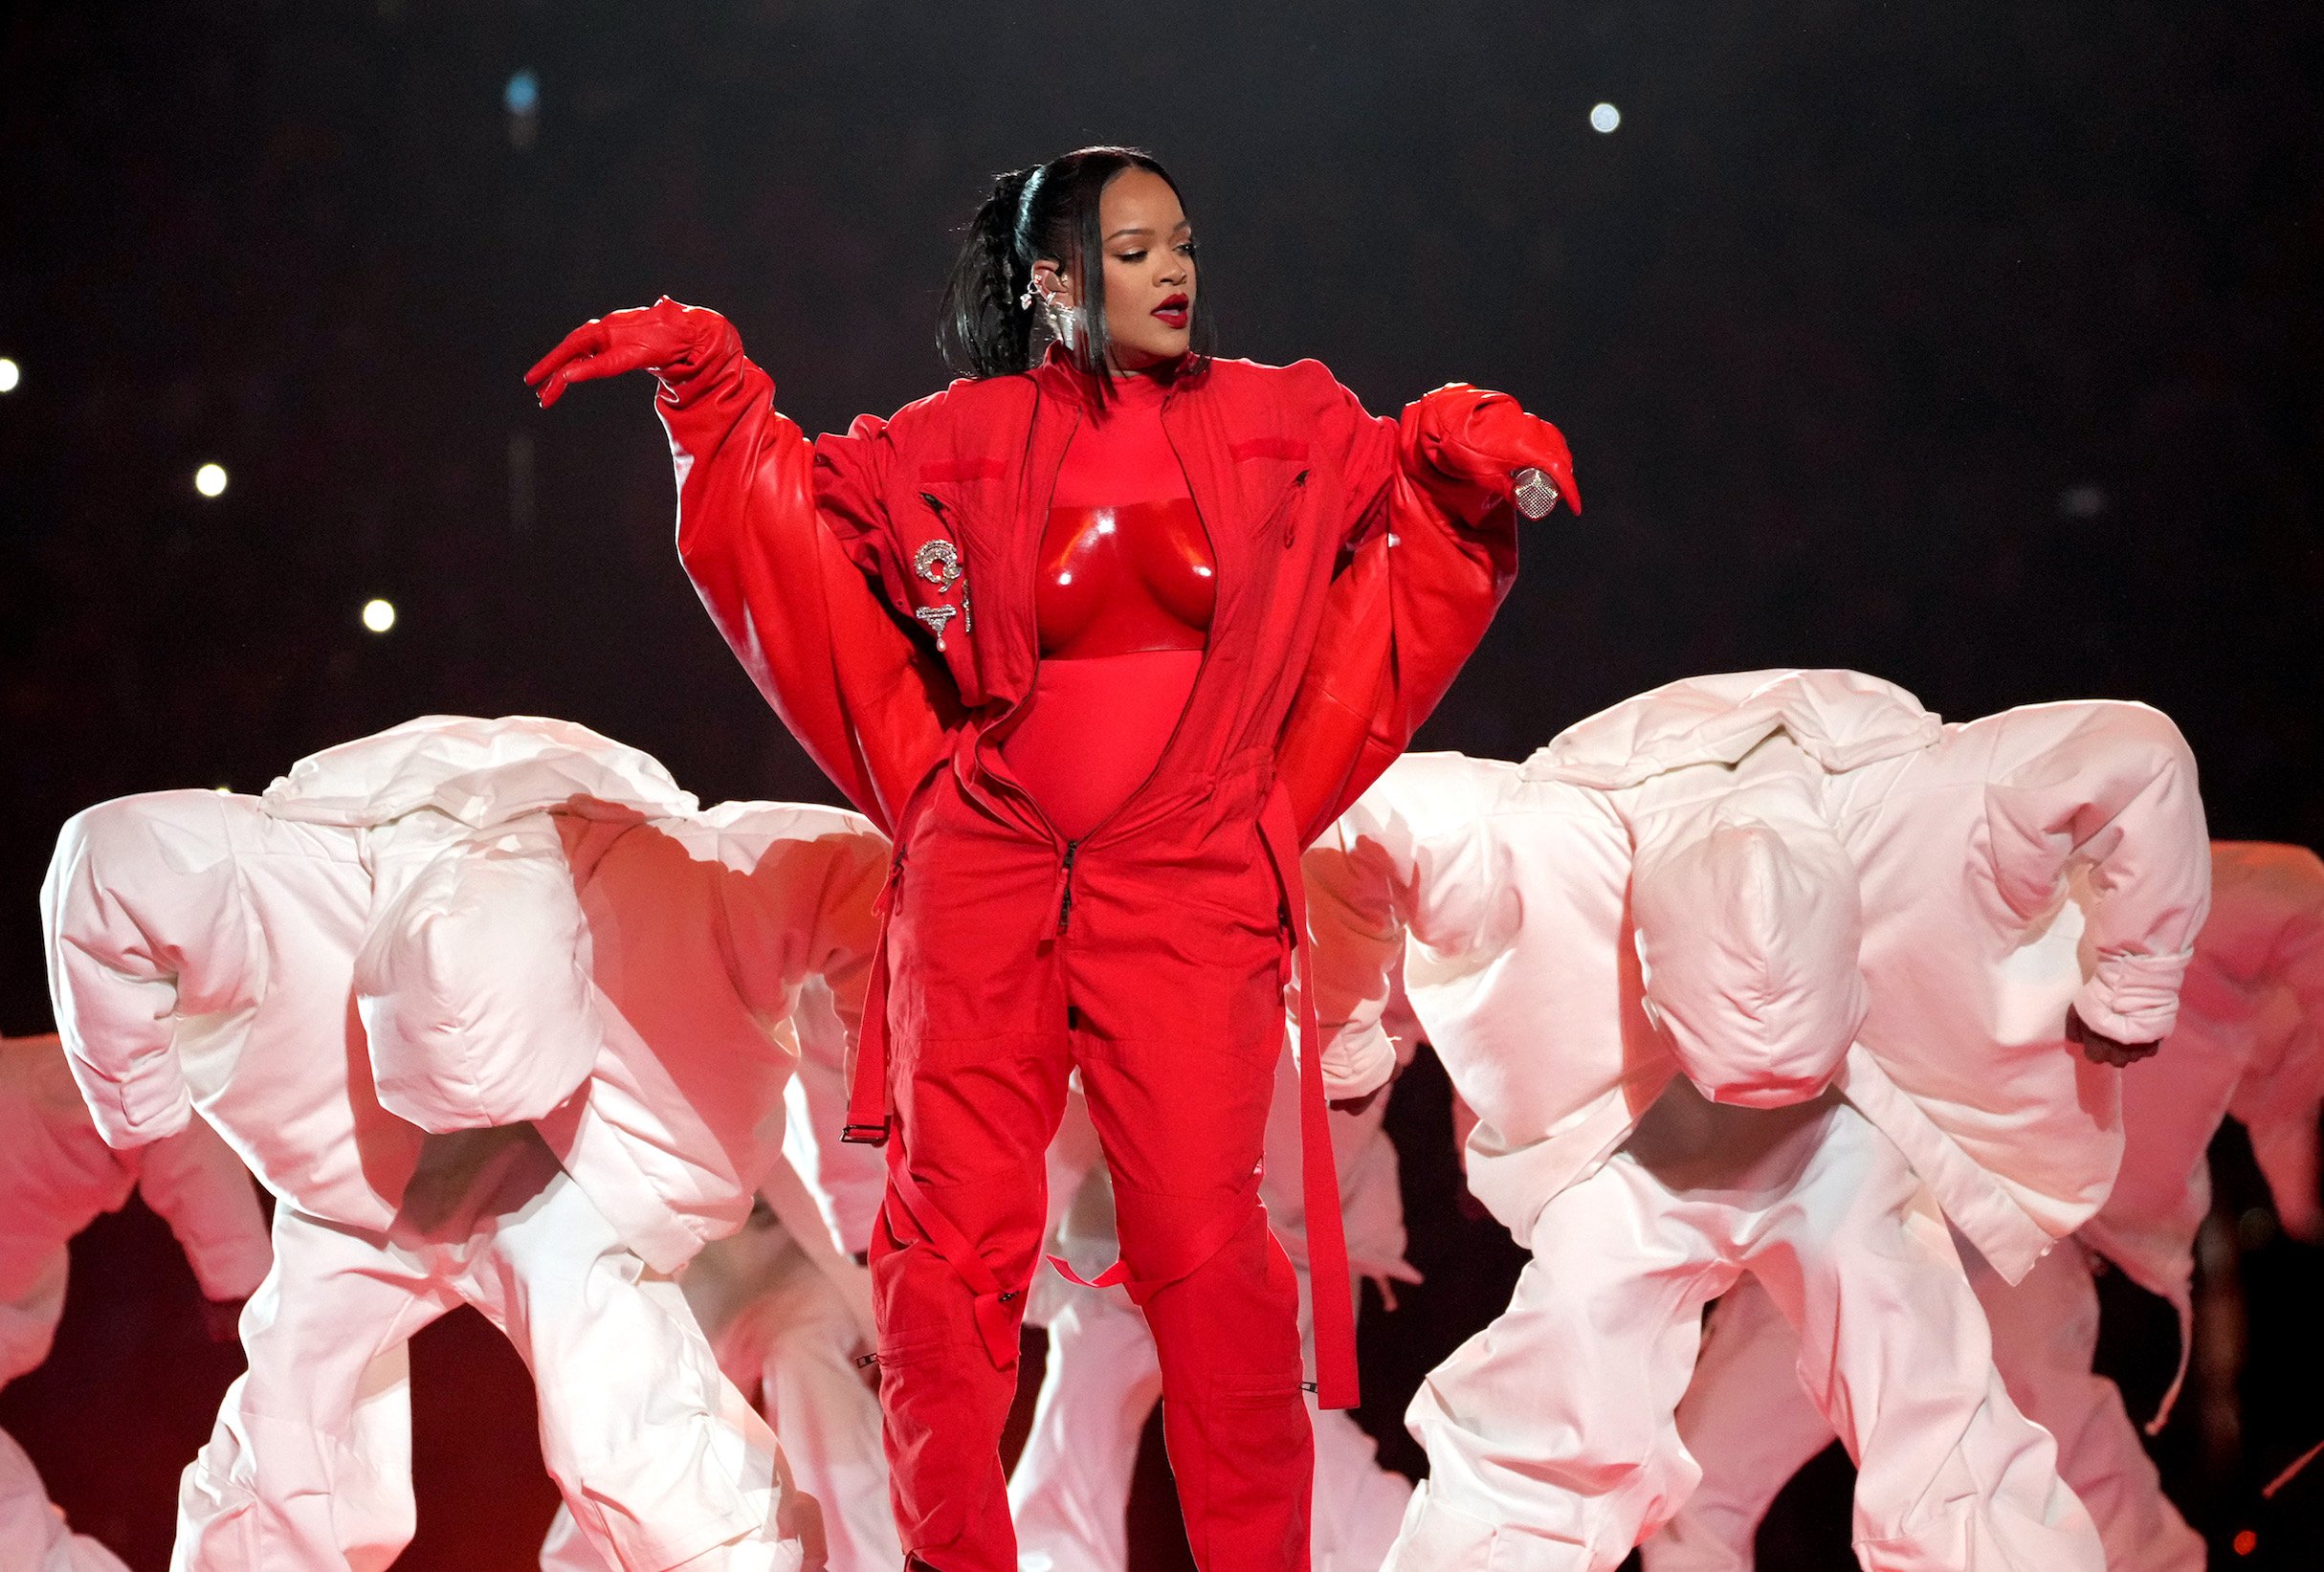 Rihanna performs during the Super Bowl LVII halftime show at State Farm Stadium in Glendale, Arizona